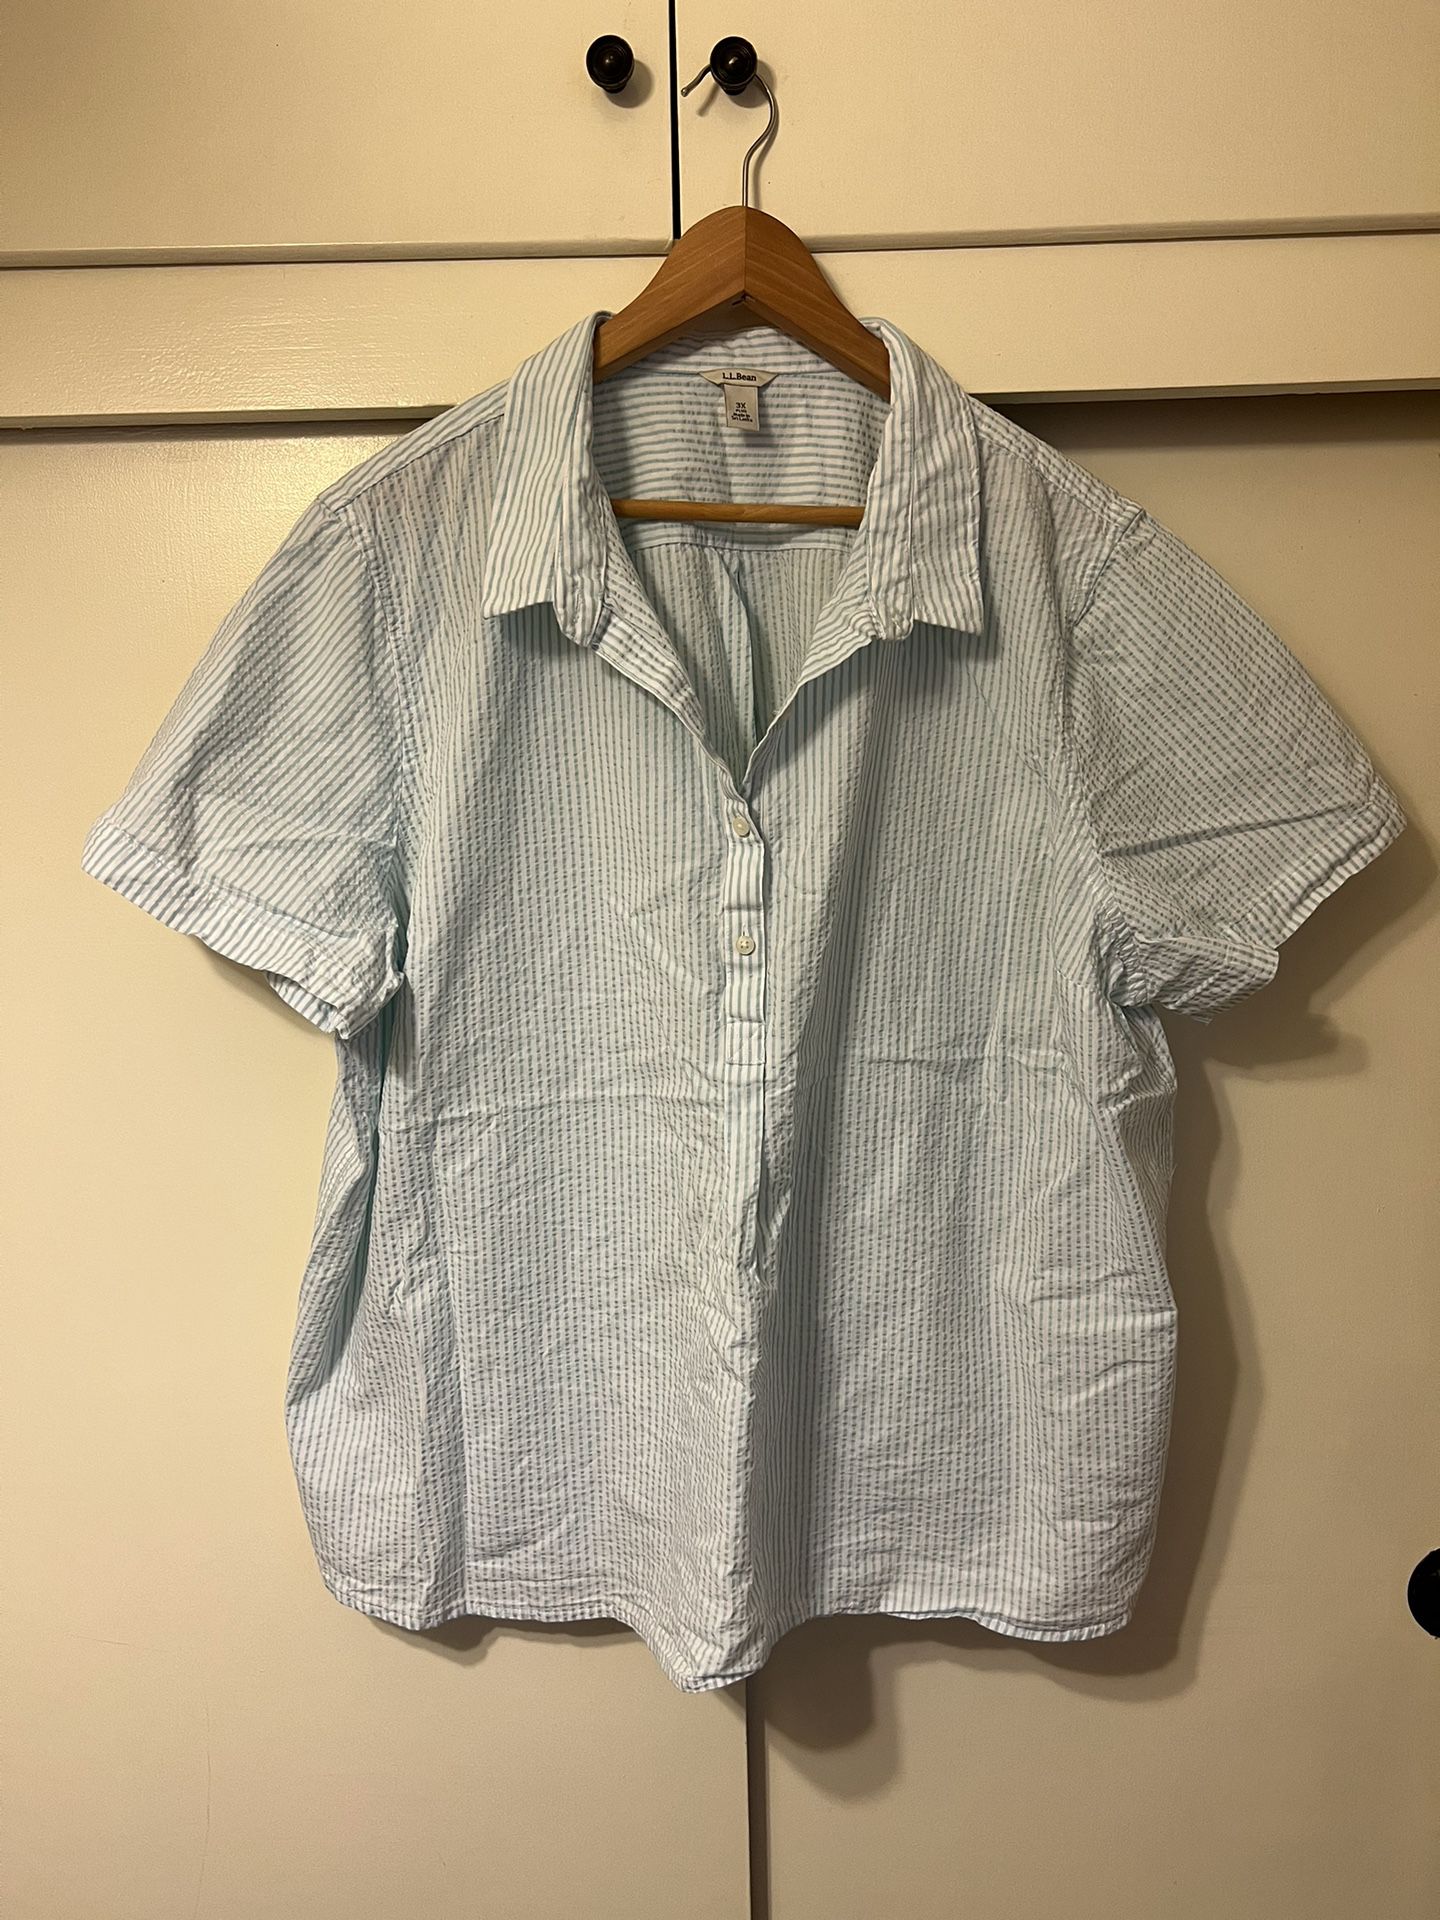 LL Bean Men's short sleeve button front casual shirt mint plaid  Size: 3X plus  Never worn. Wash once.